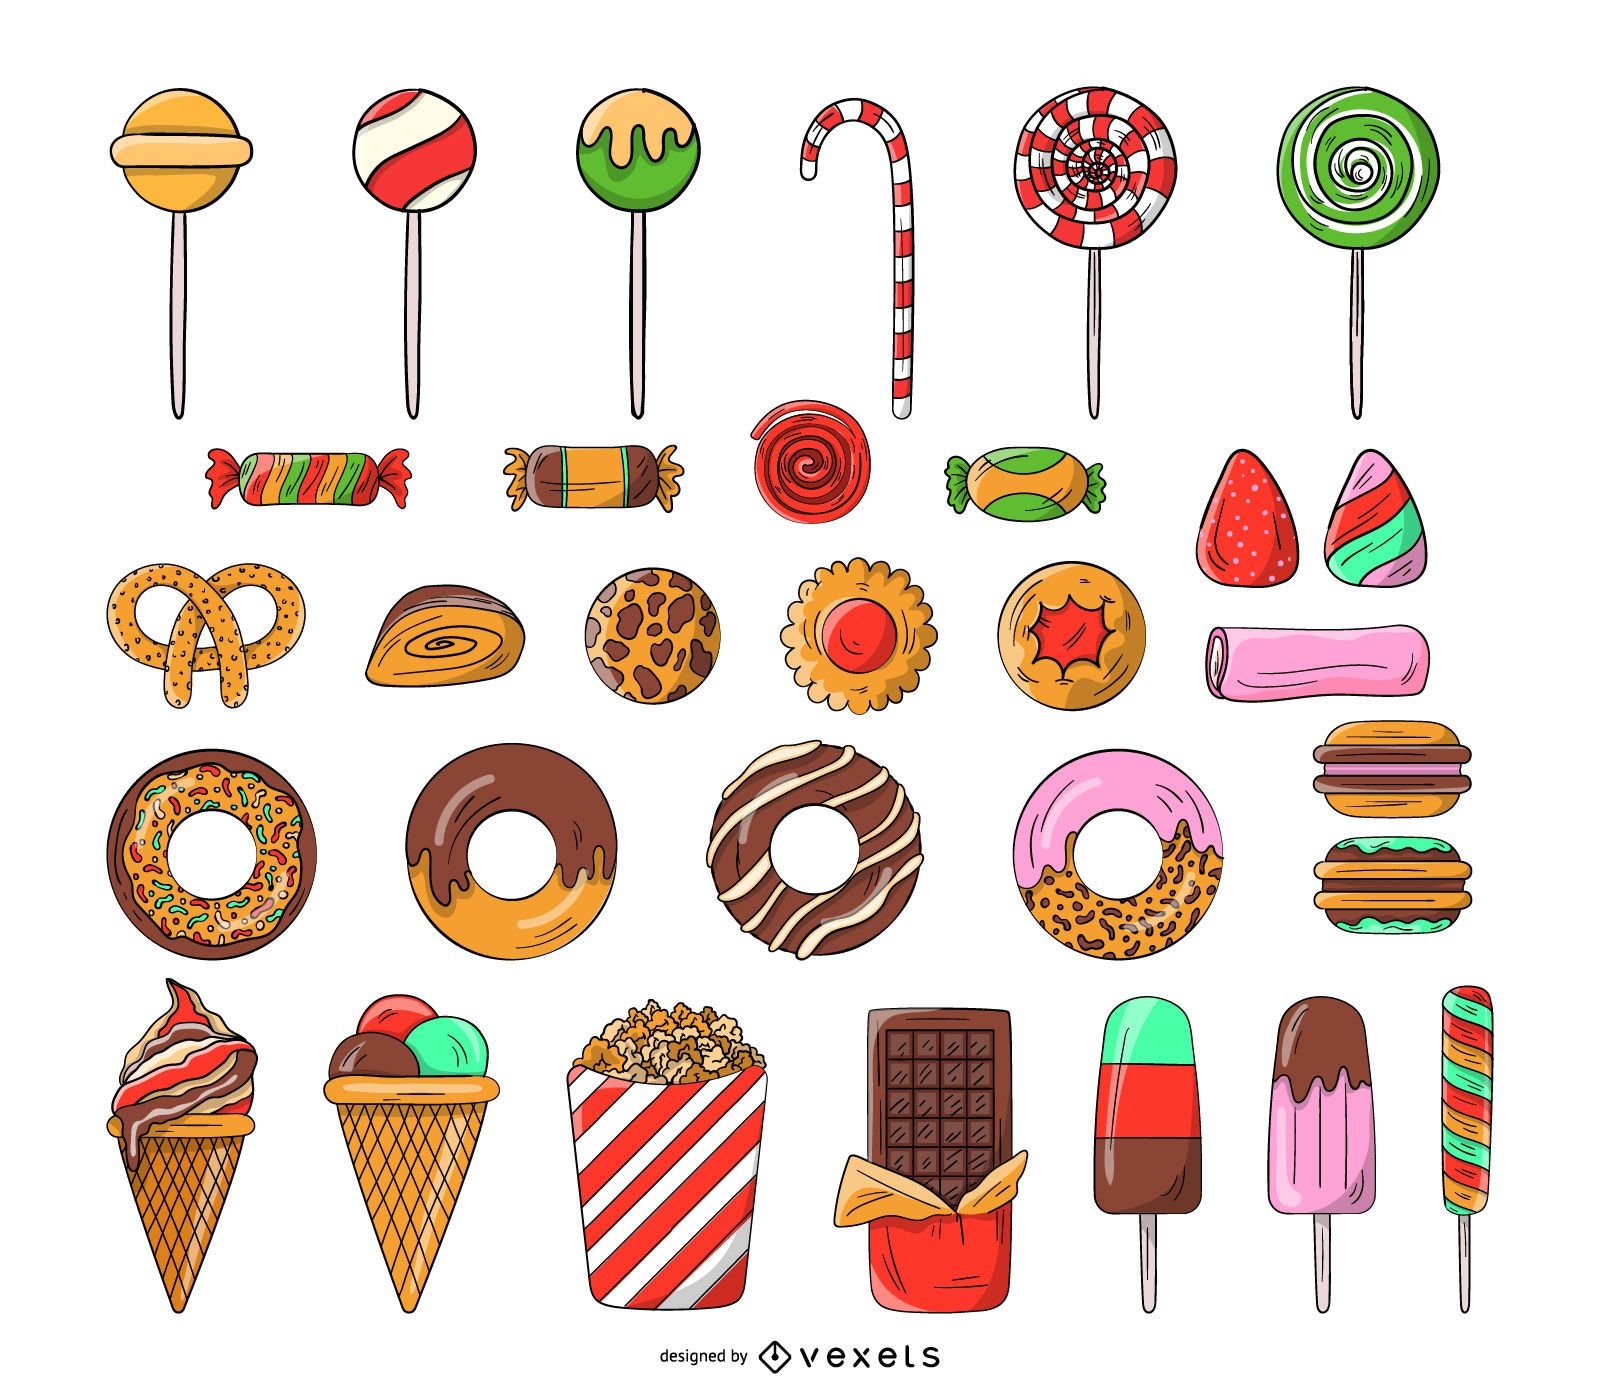 Sweets and candy icon set